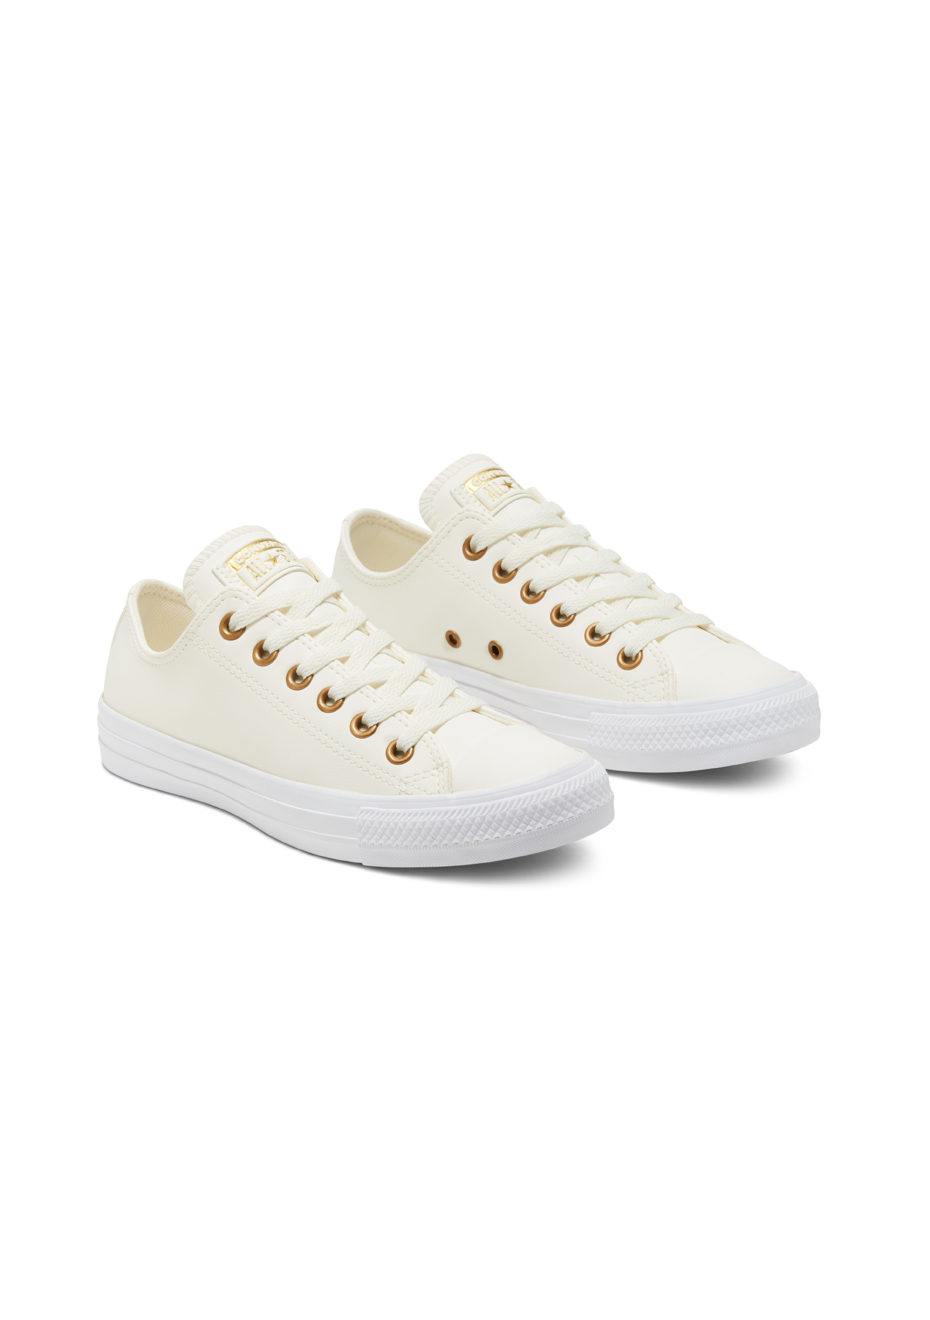 white and gold converse womens